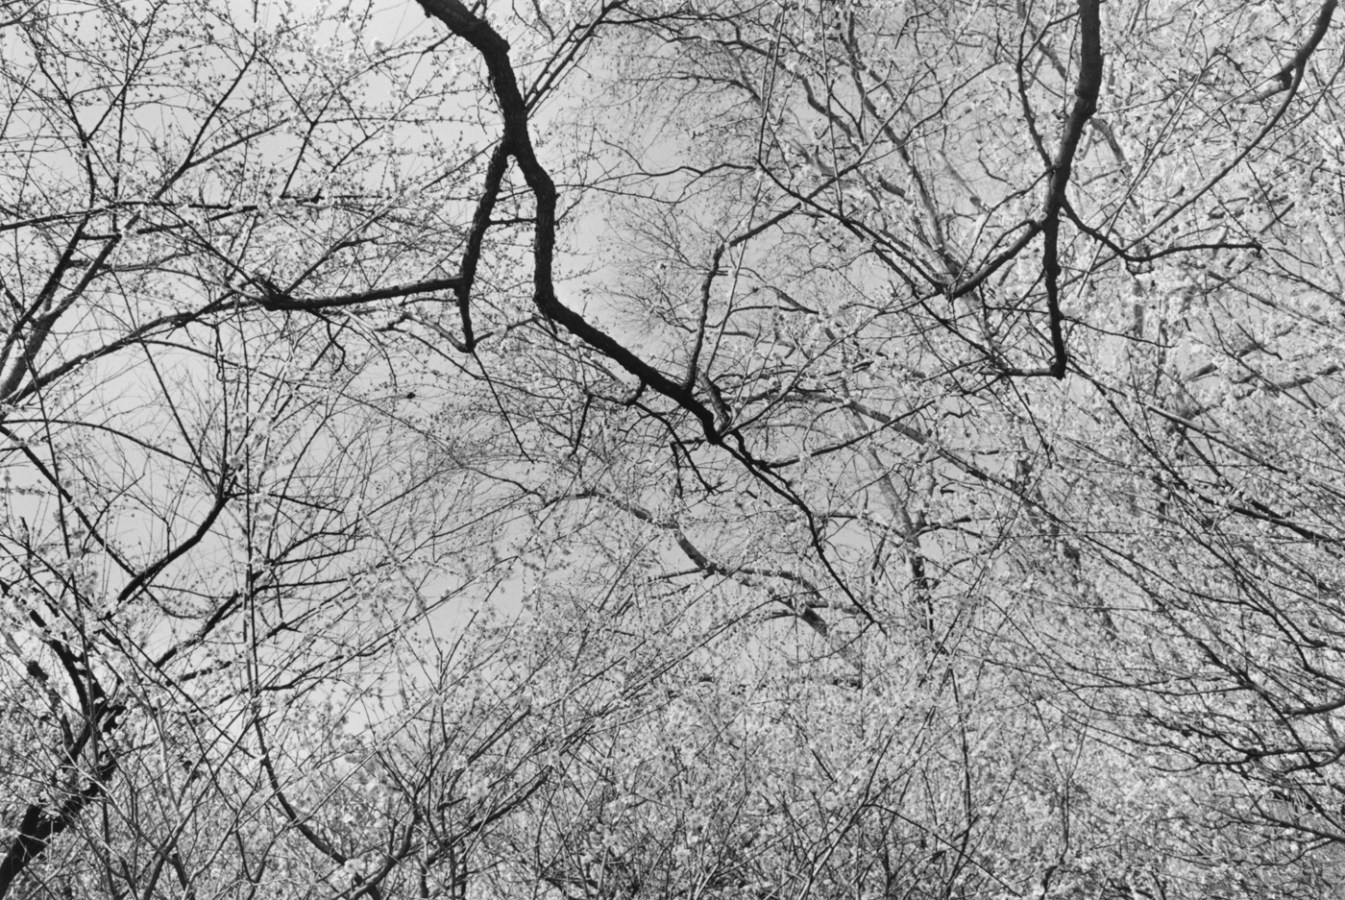 Black-and-white photograph looking upwards at bare tree branches